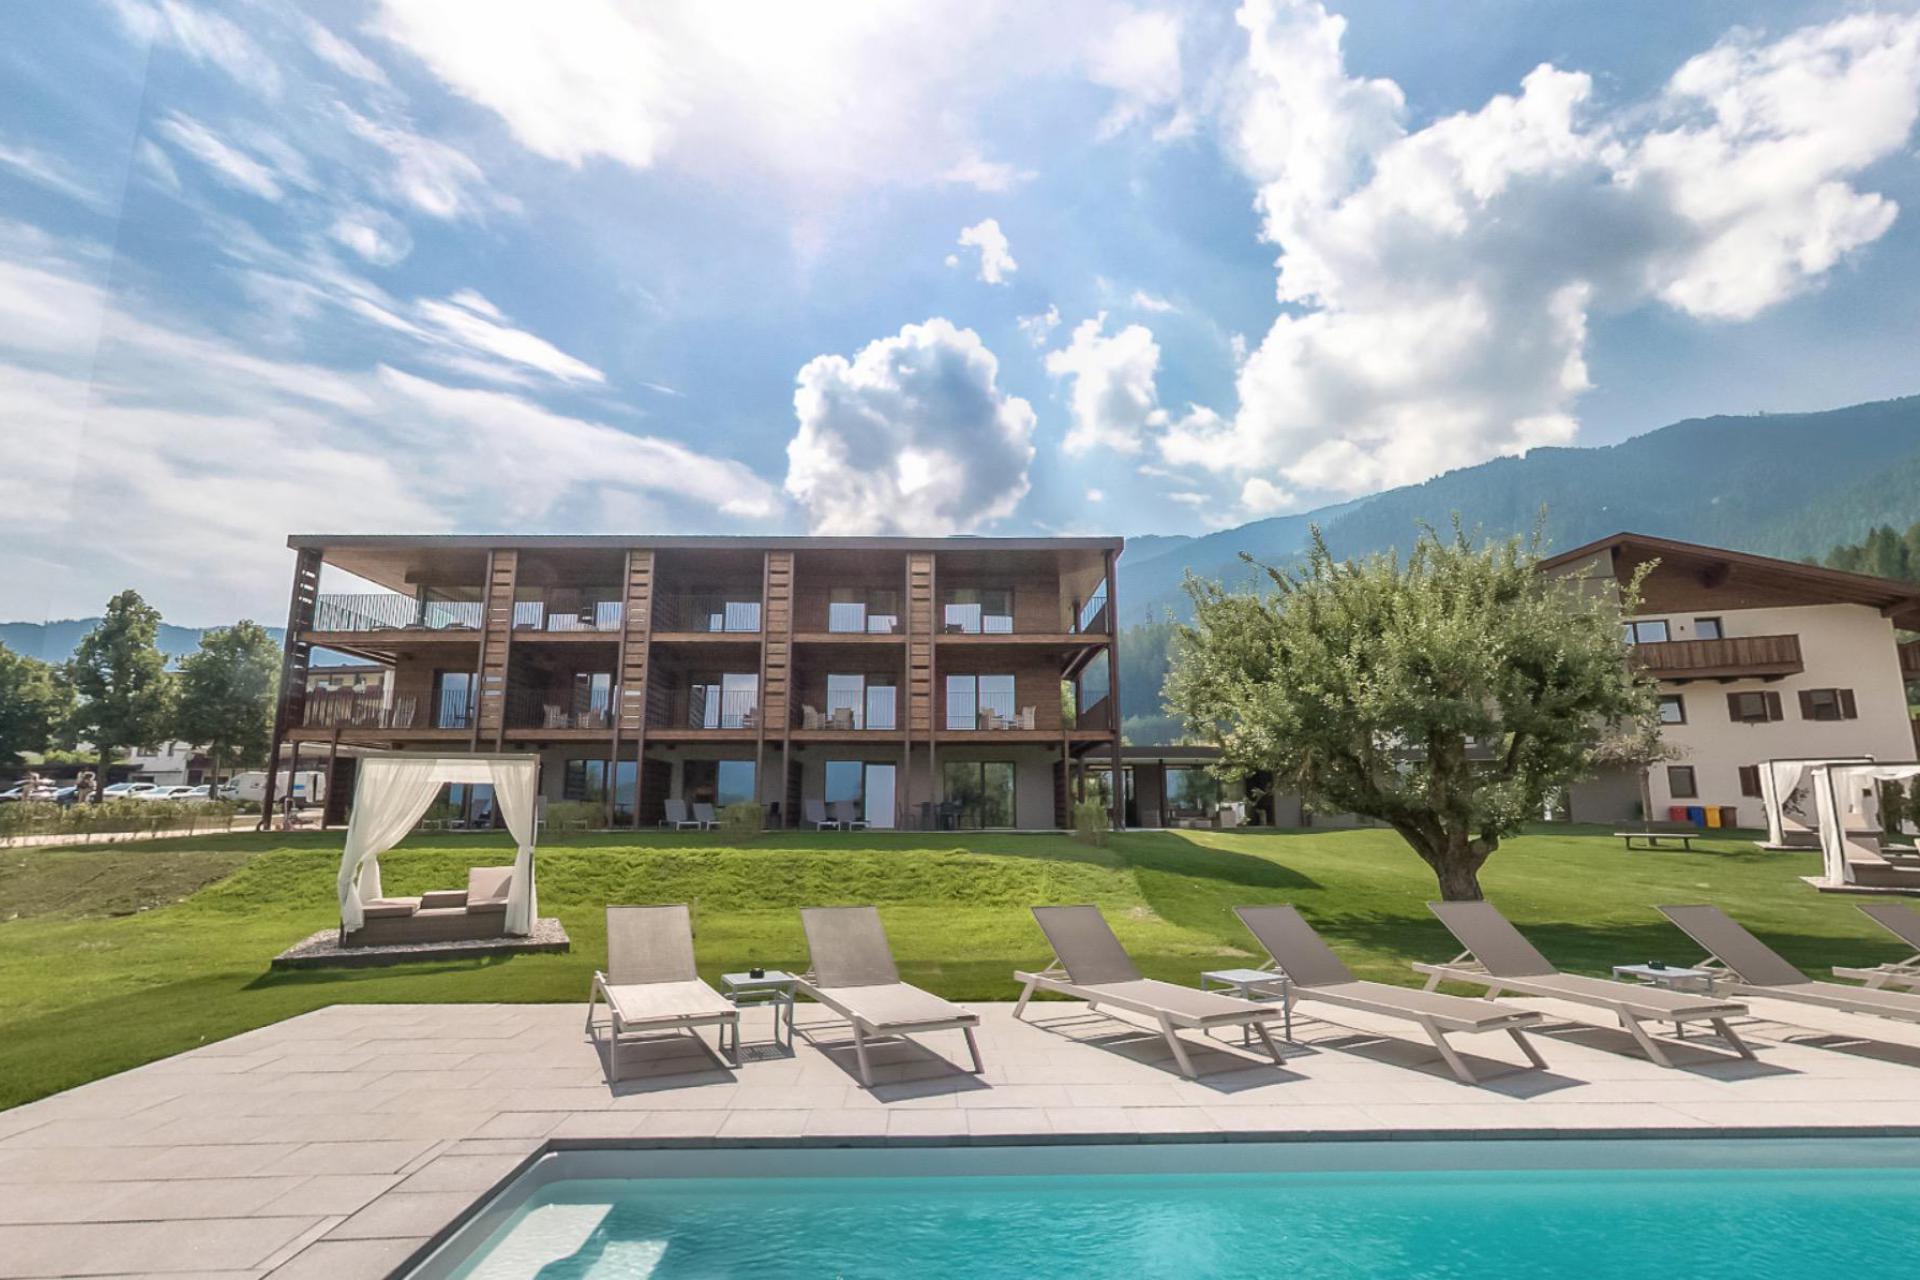 Agriturismo Dolomites Residence within walking distance of a village and ski lift